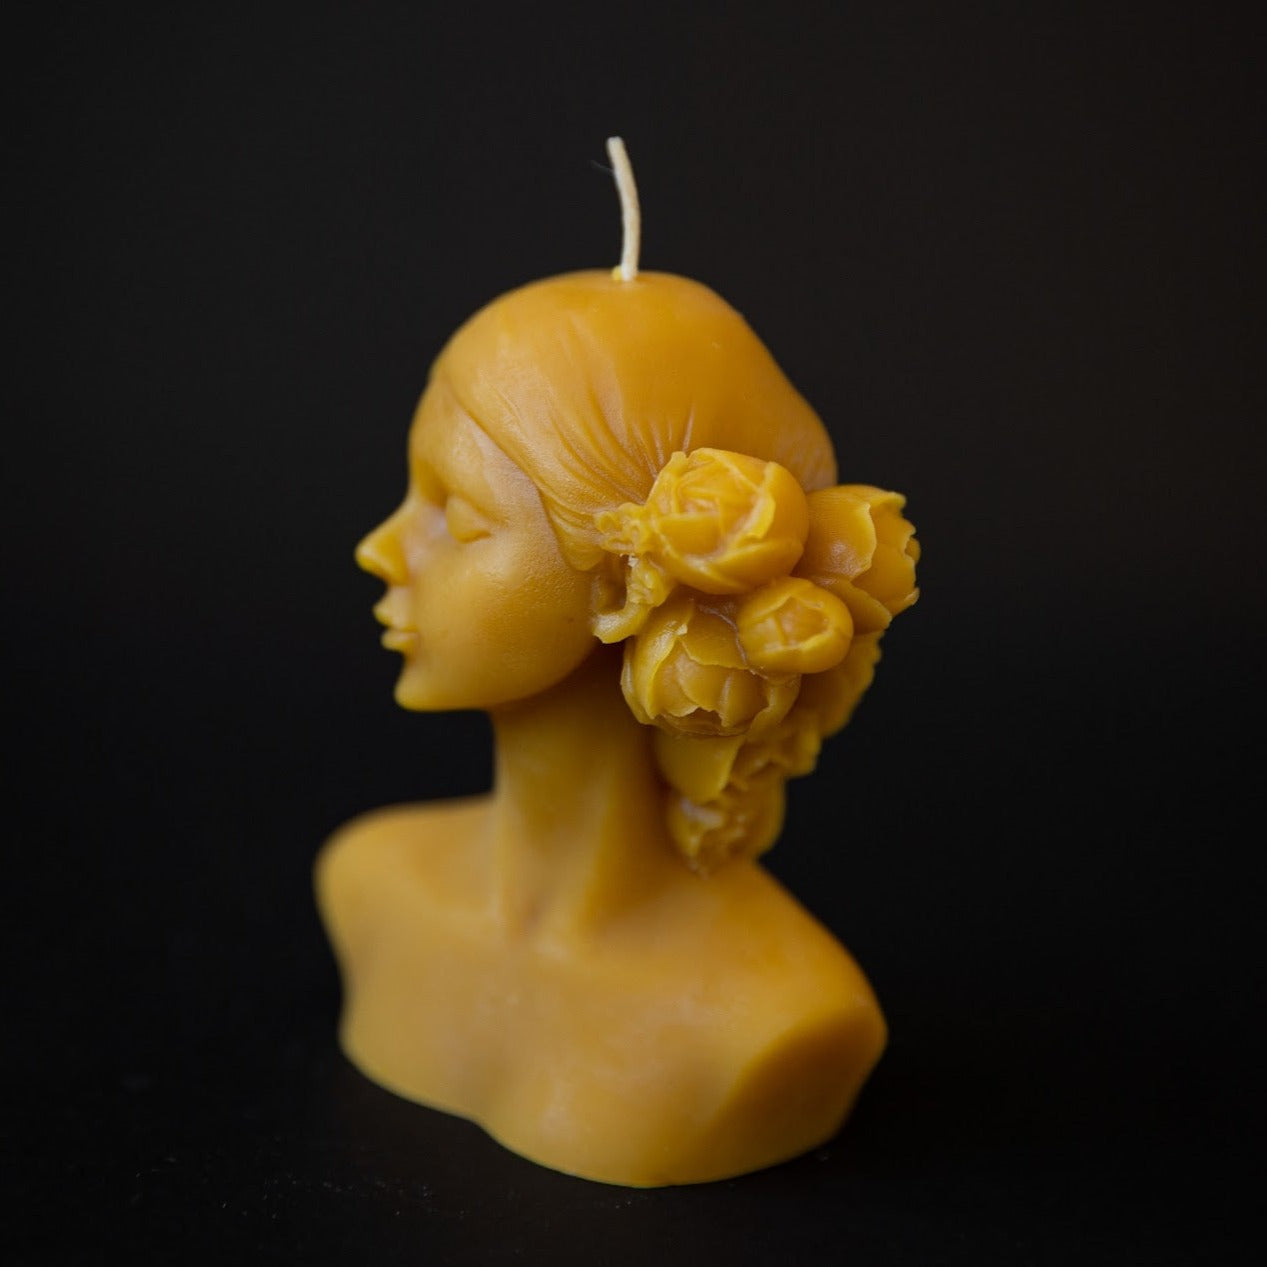 beeswax candle form lady bust with flowers in her hair